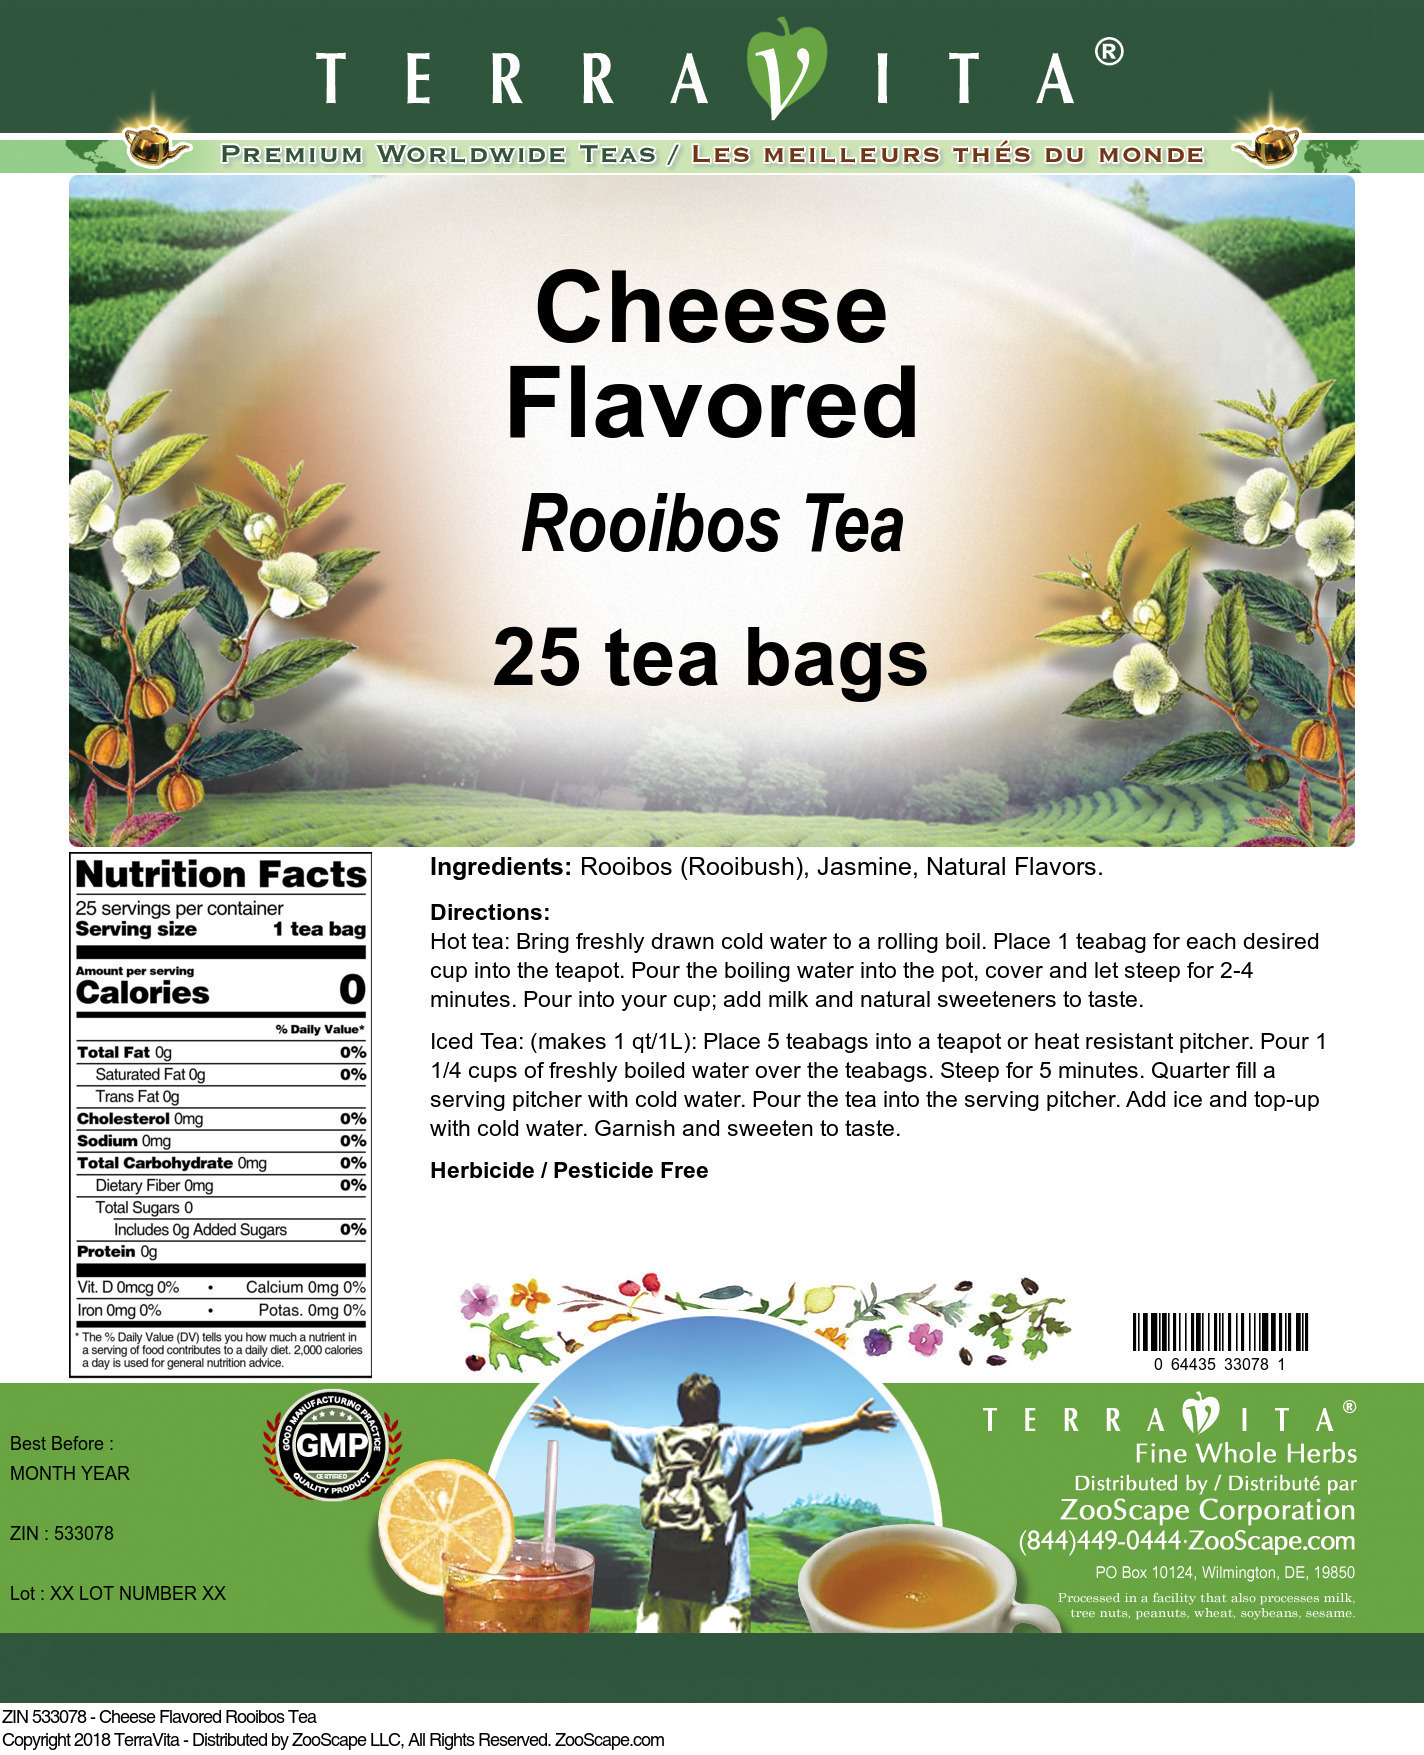 Cheese Flavored Rooibos Tea - Label